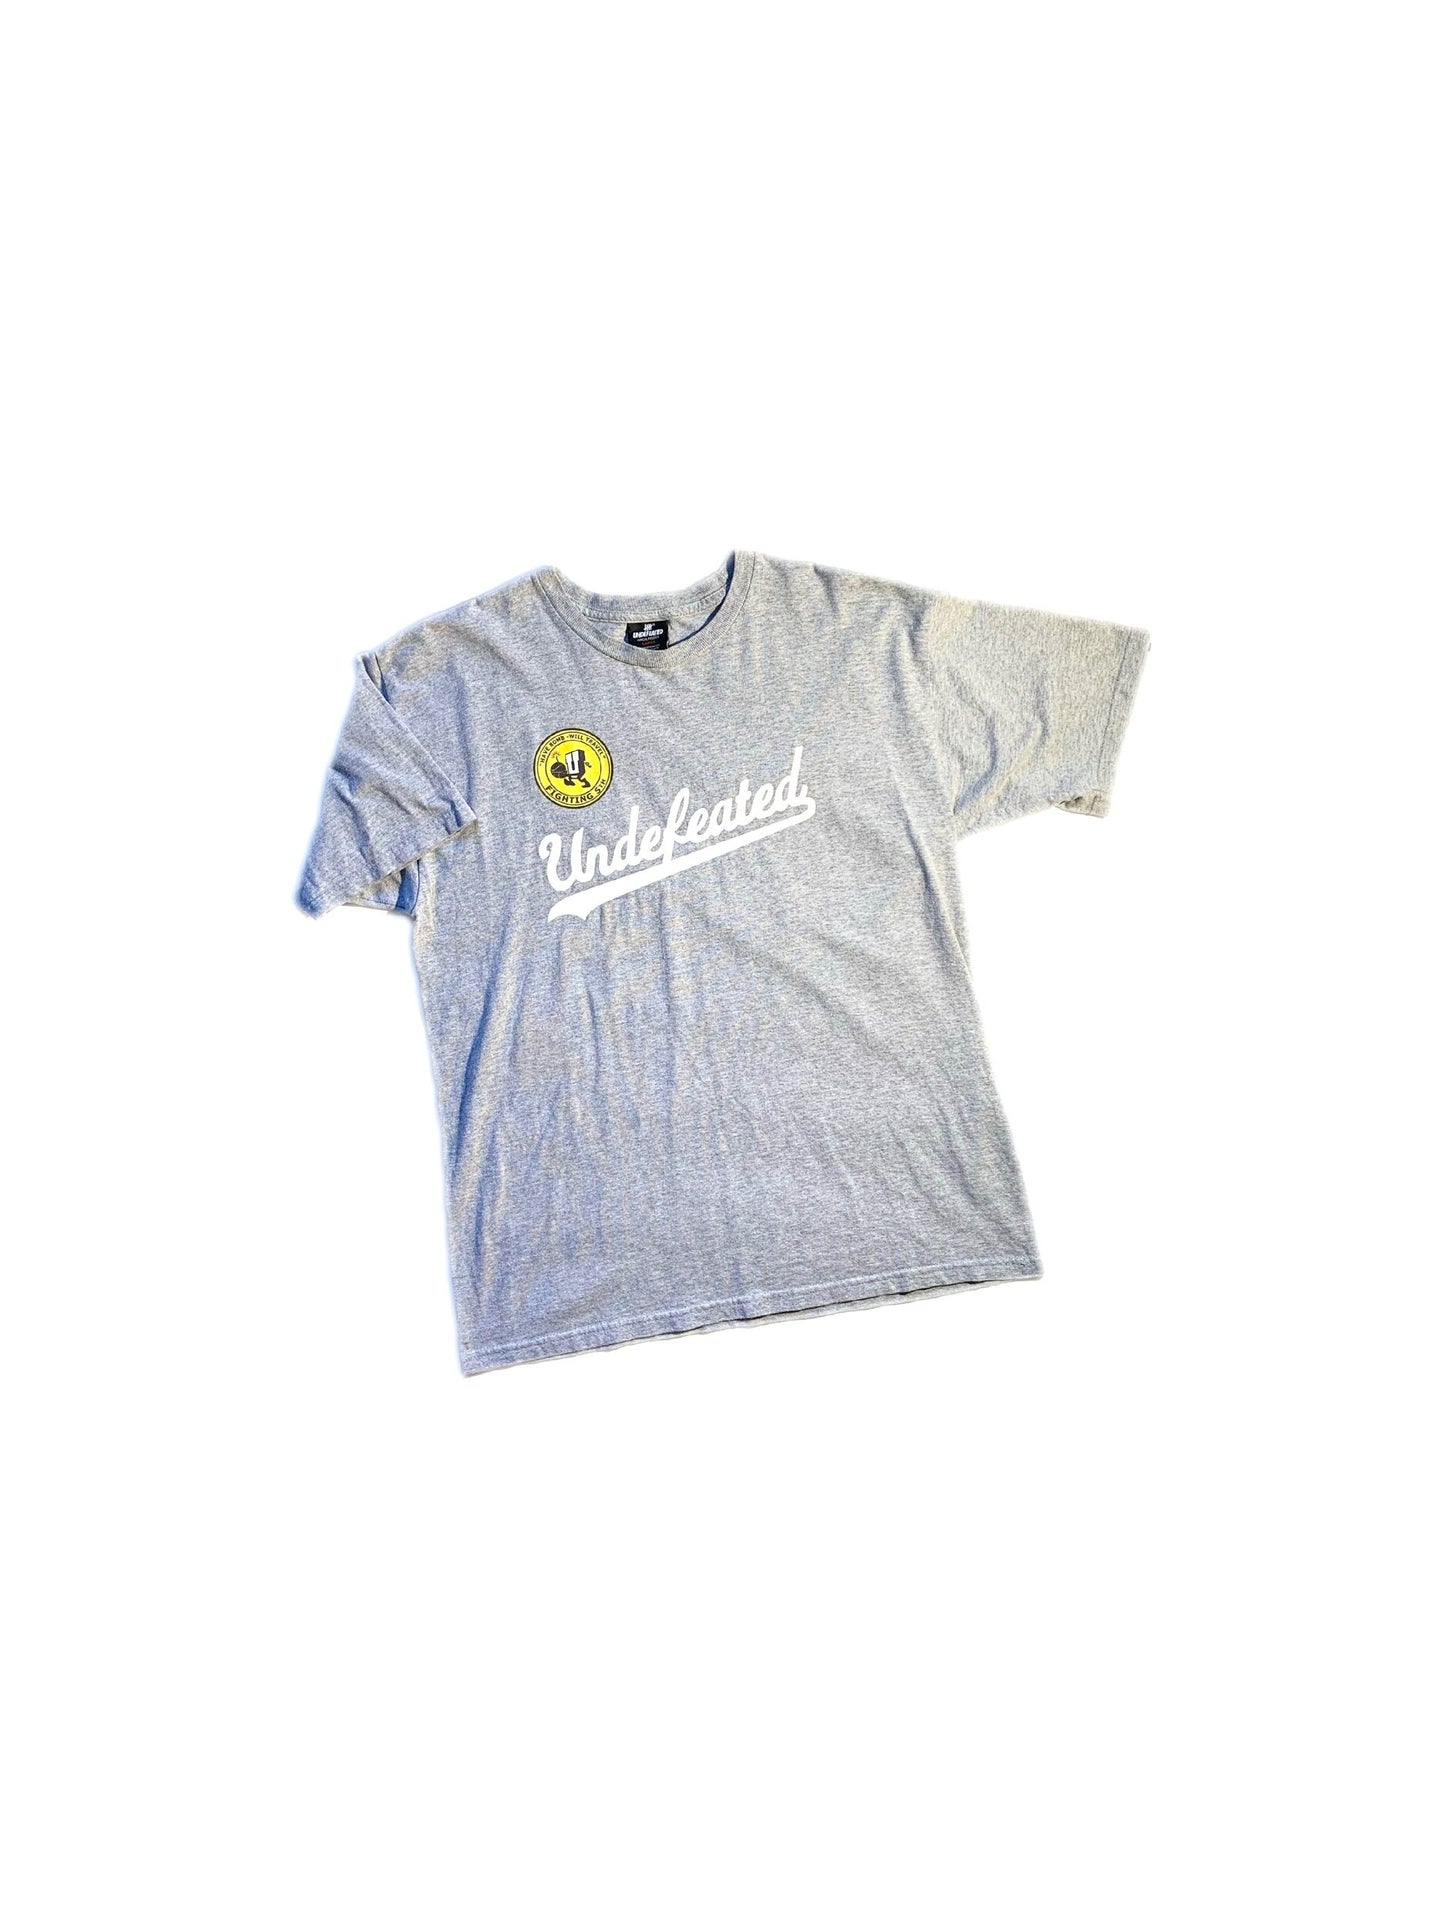 Vintage Undefeated Fighting 5th T-Shirt